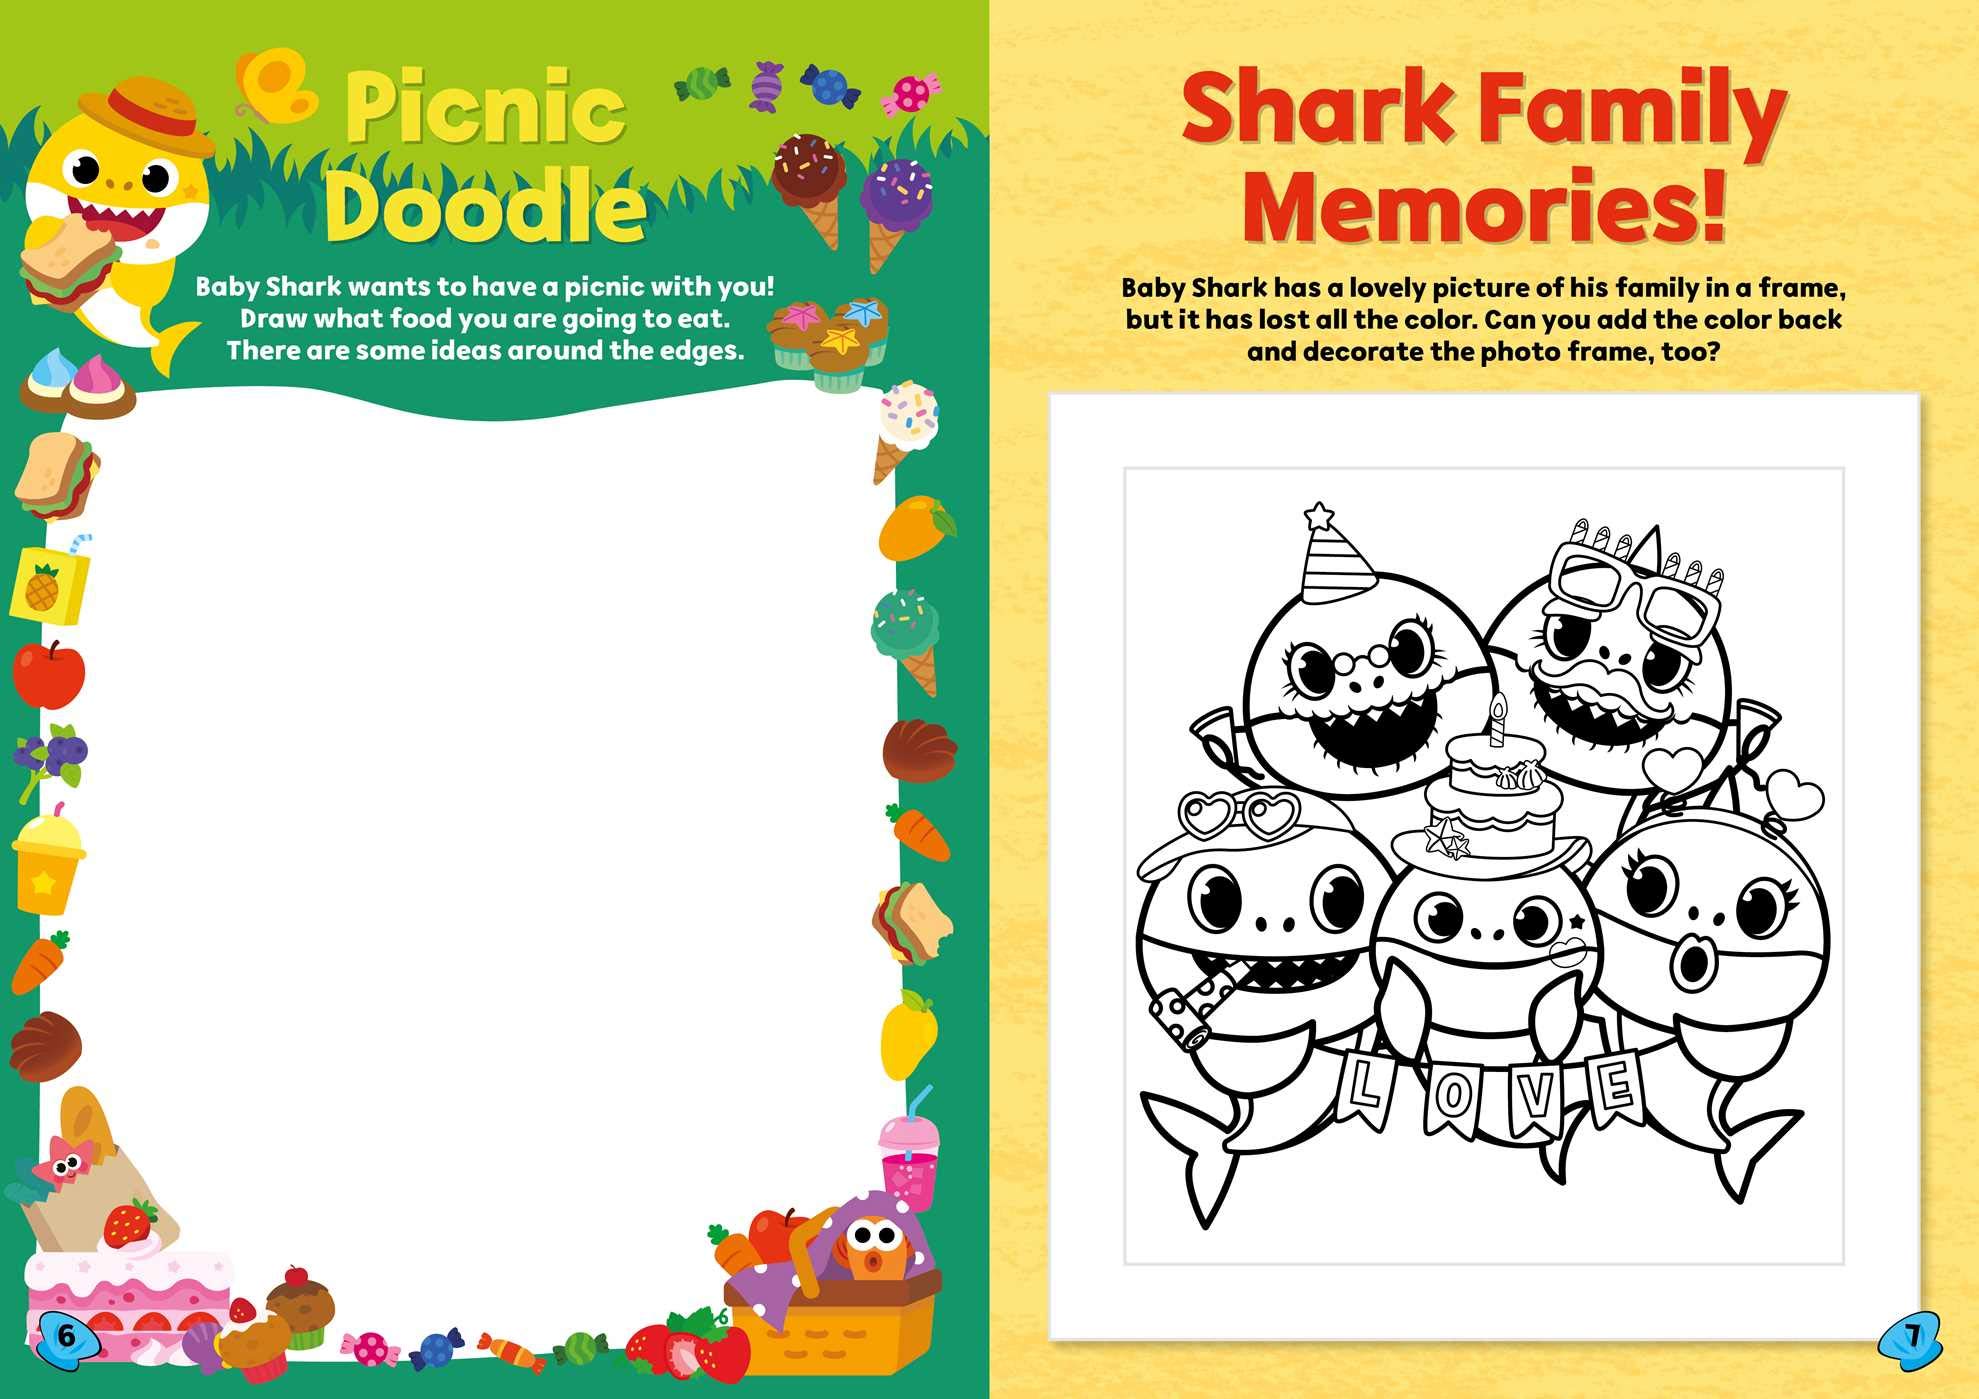 Baby Shark: Puffy Sticker and Activity Book